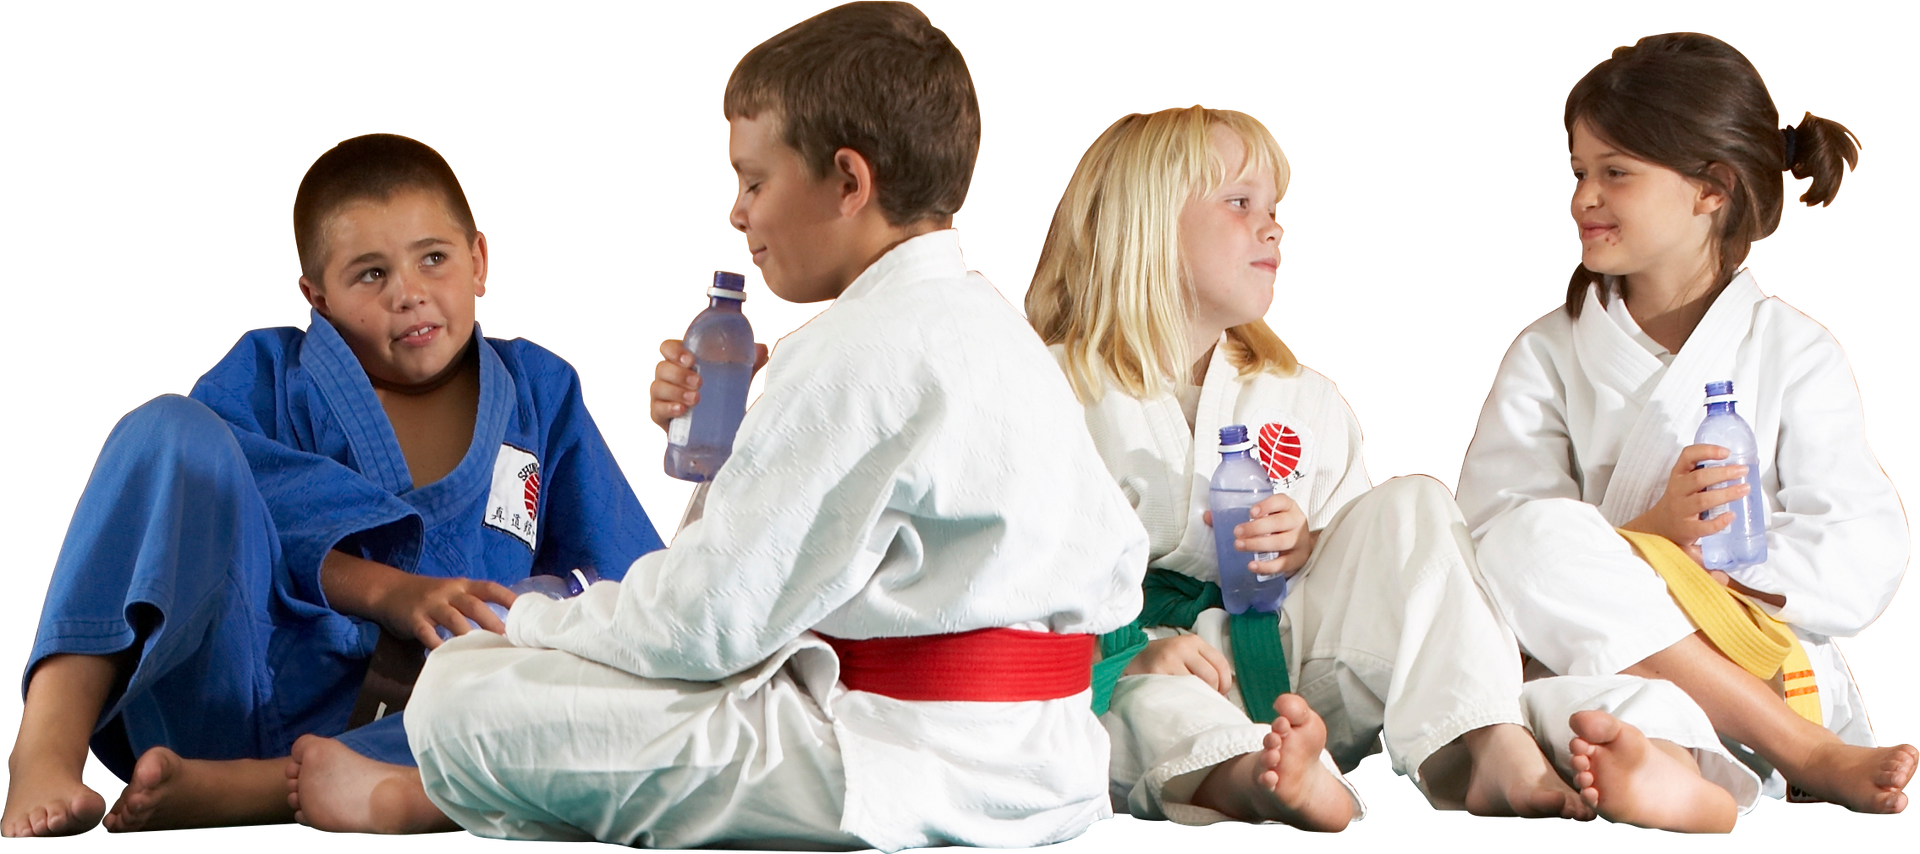 A group of kids in karate uniforms are sitting on the floor drinking water